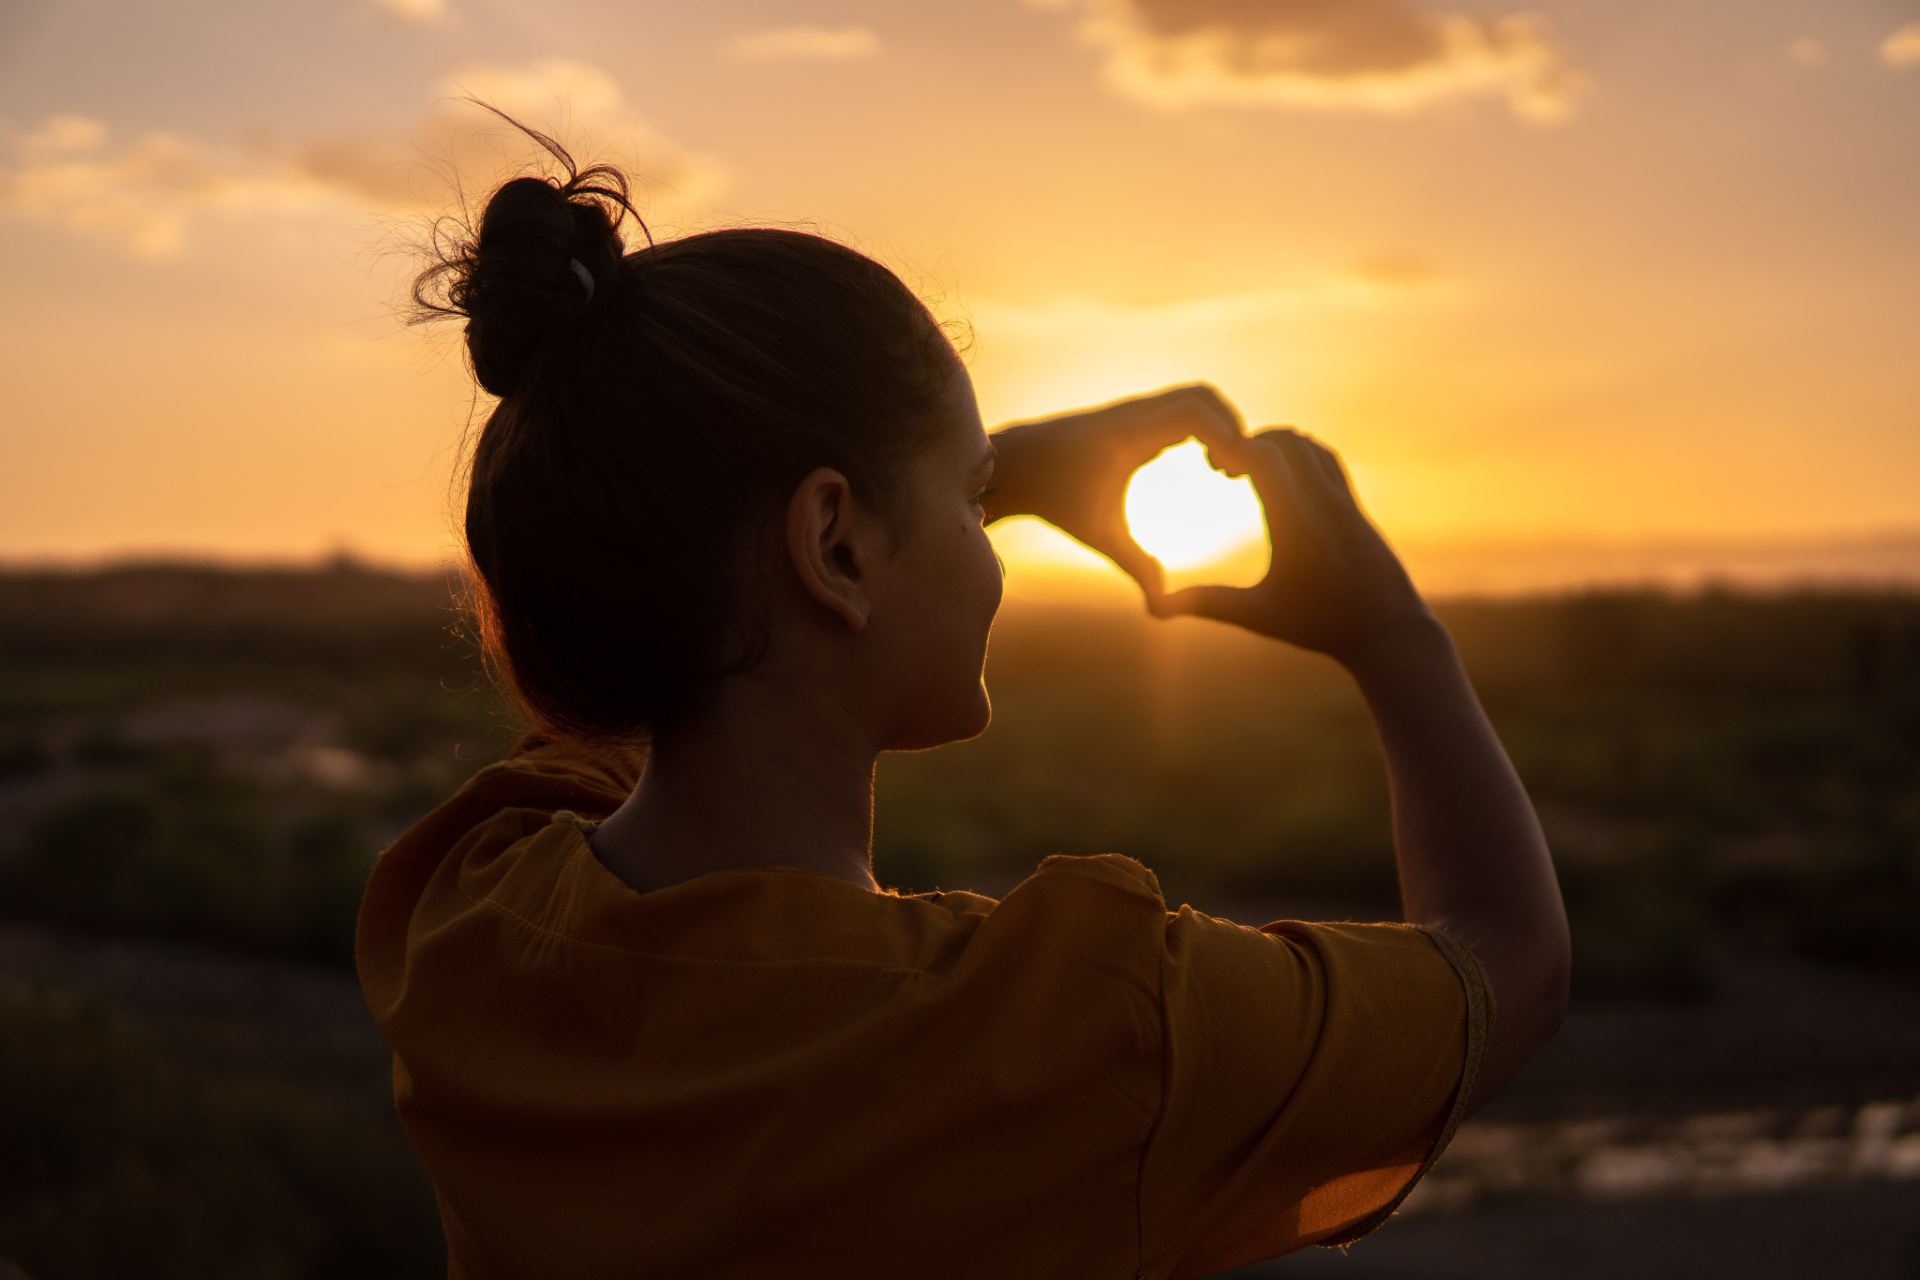 Woman making a heart shape with both hands facing a sunset